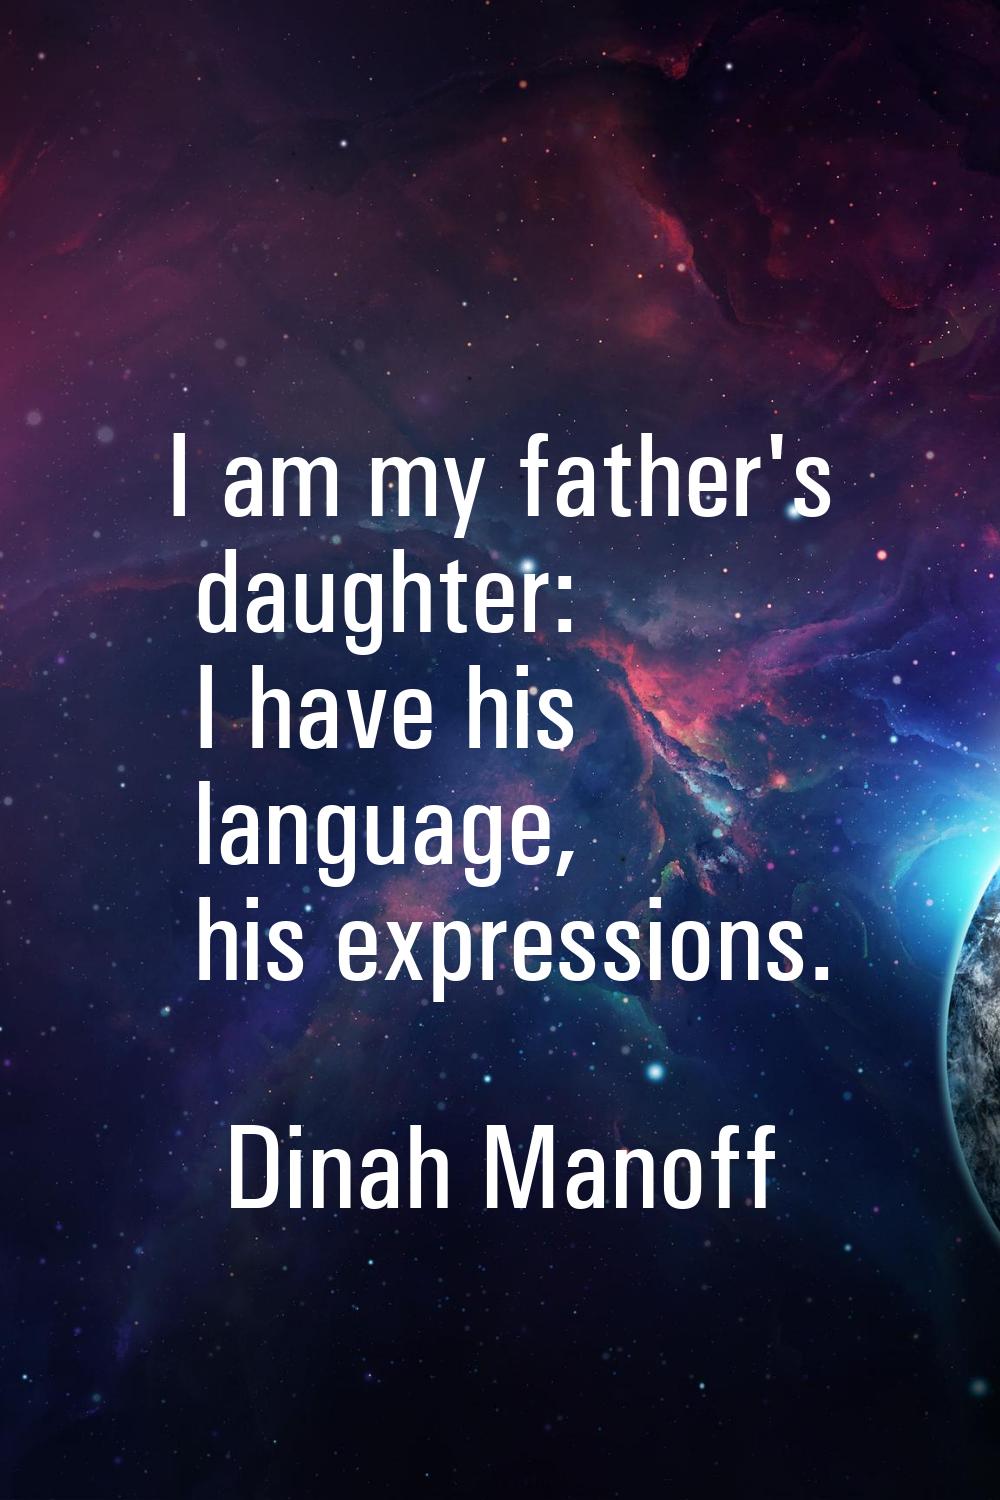 I am my father's daughter: I have his language, his expressions.